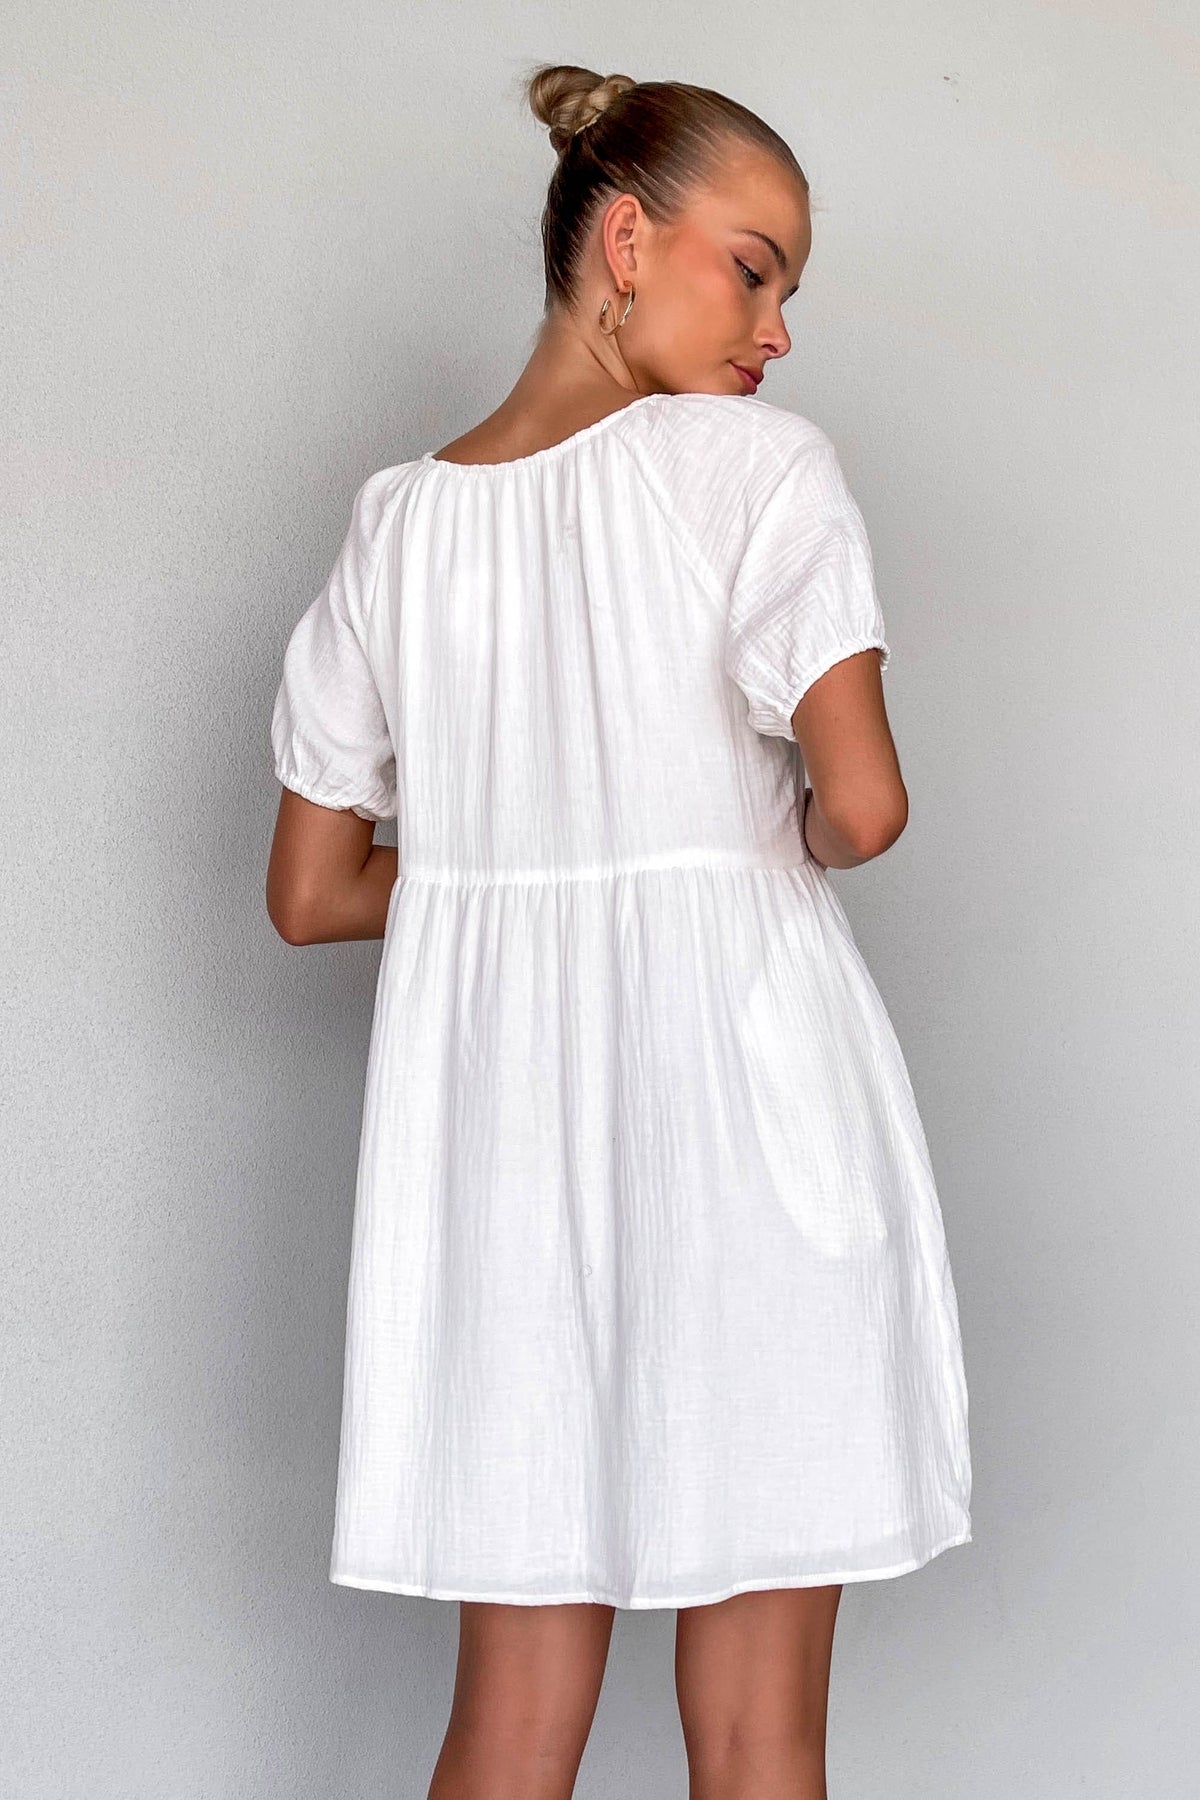 Millane Dress, BALLOON SLEEVE, COTTON &amp; POLYESTER, COTTON AND POLYESTER, DRESS, DRESSES, MINI DRESS, new arrivals, POLYESTER AND COTTON, WHITE, , -MISHKAH